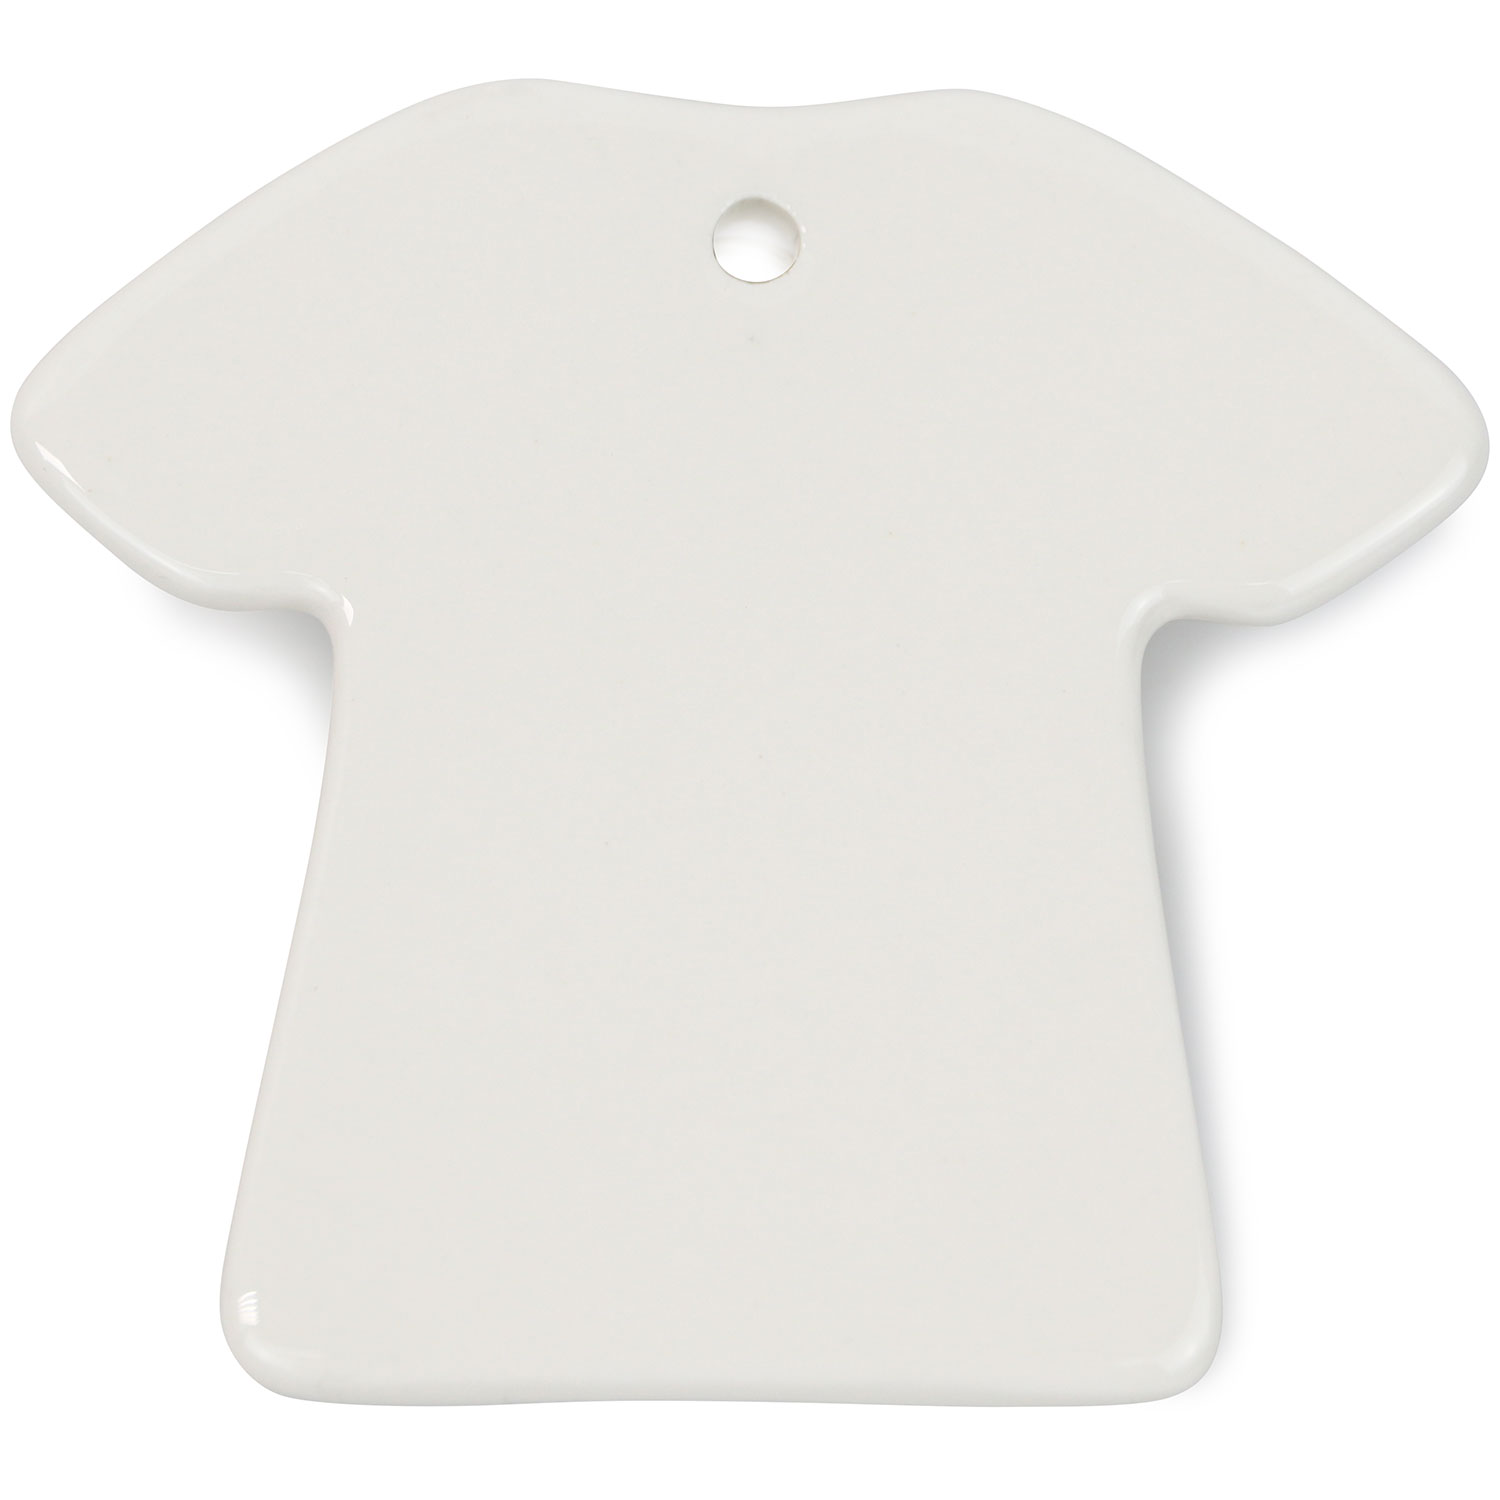 Sublimation Blank Ceramic White T-shirt Shaped Ornament, 100 In A Case